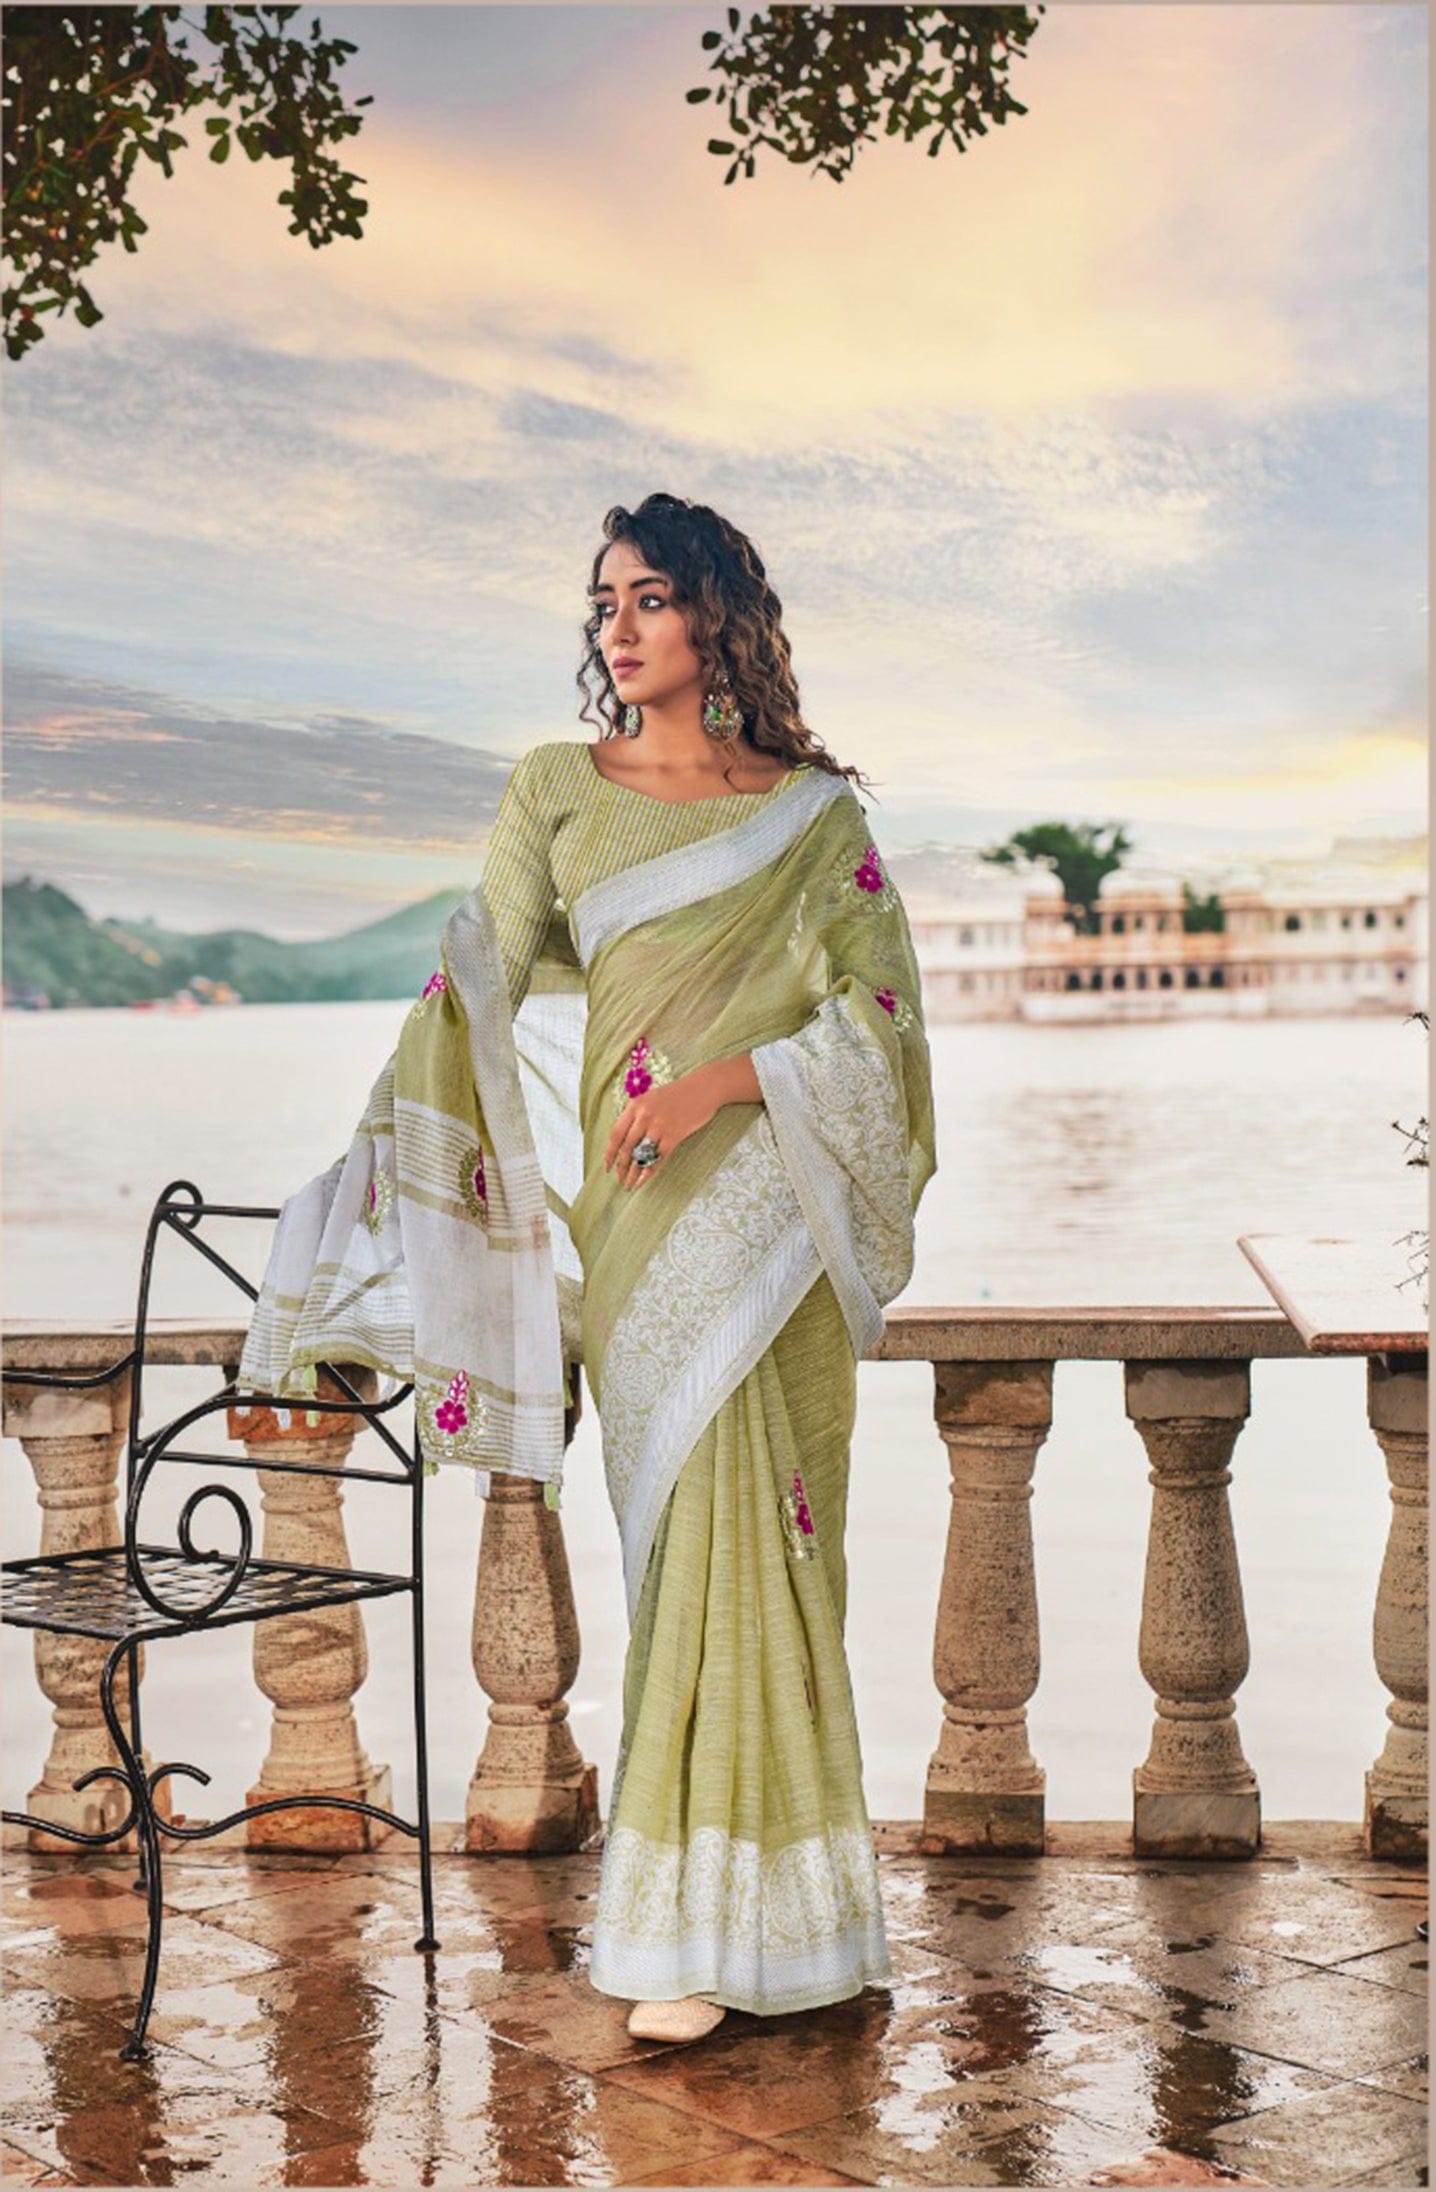 Handmade designer embroidered gota patti linen saree and blouse in hues of lime on white for online shopping made in India